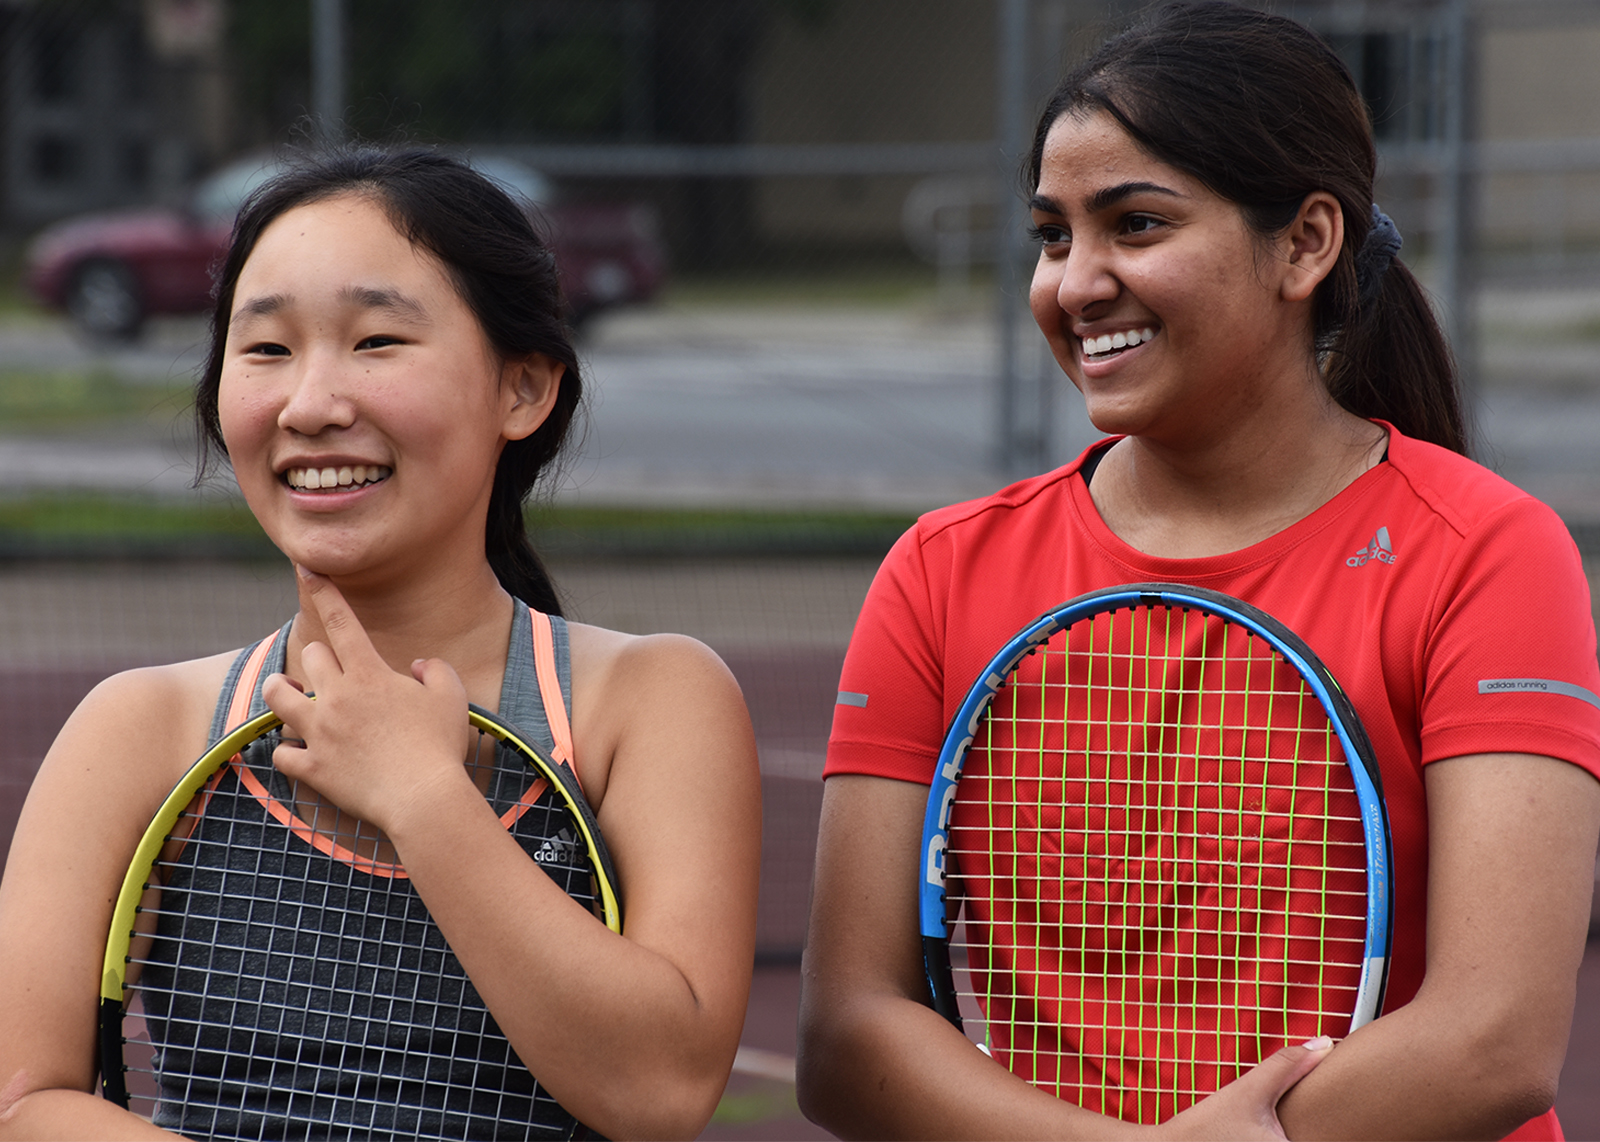 two female student athletes smiling holding tennis raquets